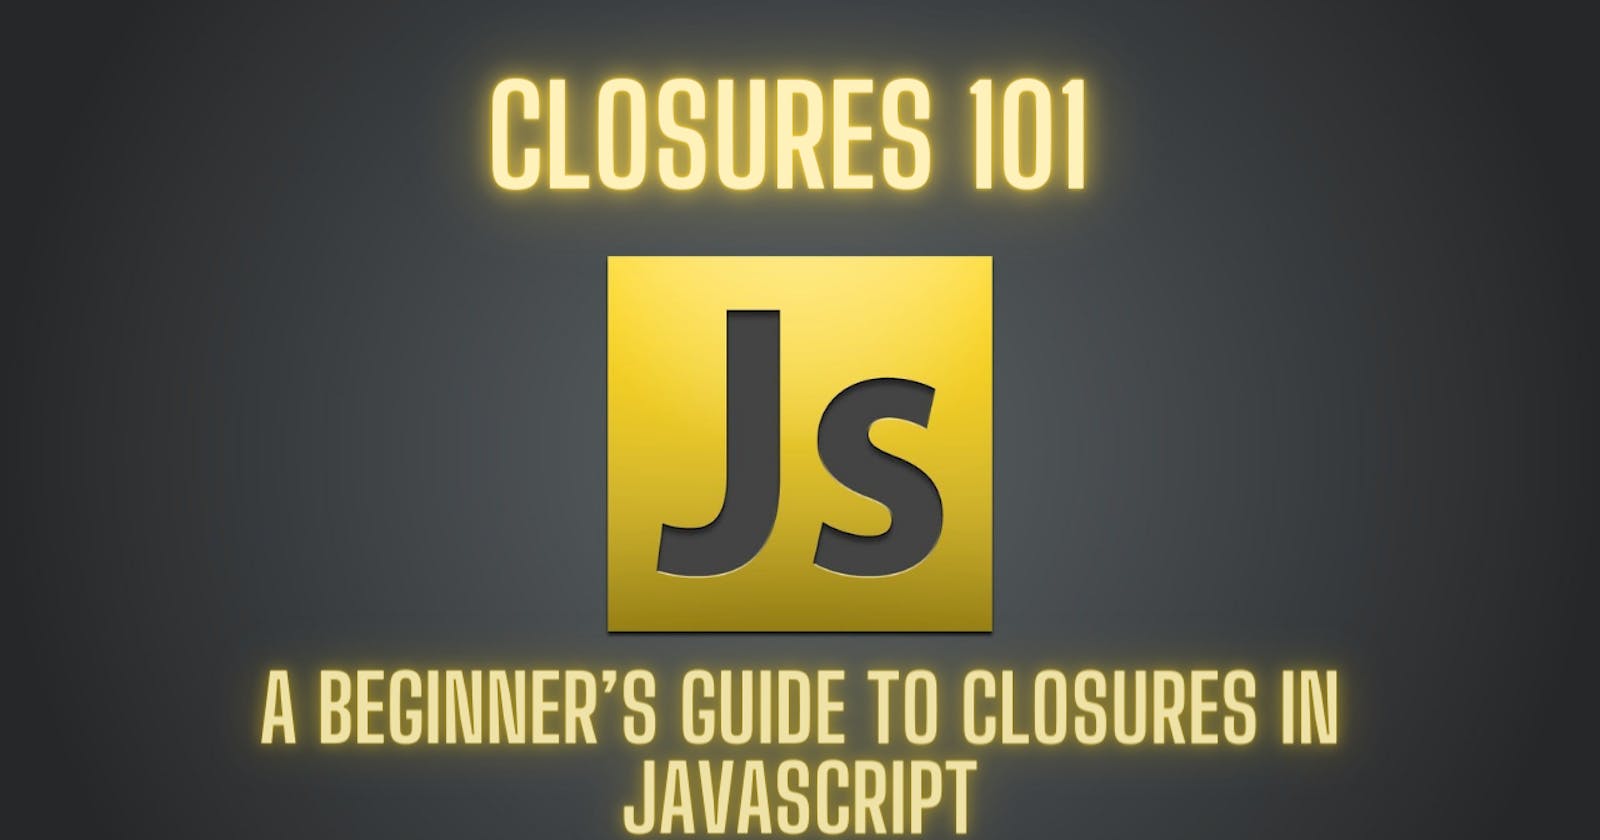 Closures 101: A Beginner’s Guide to Closures in JavaScript